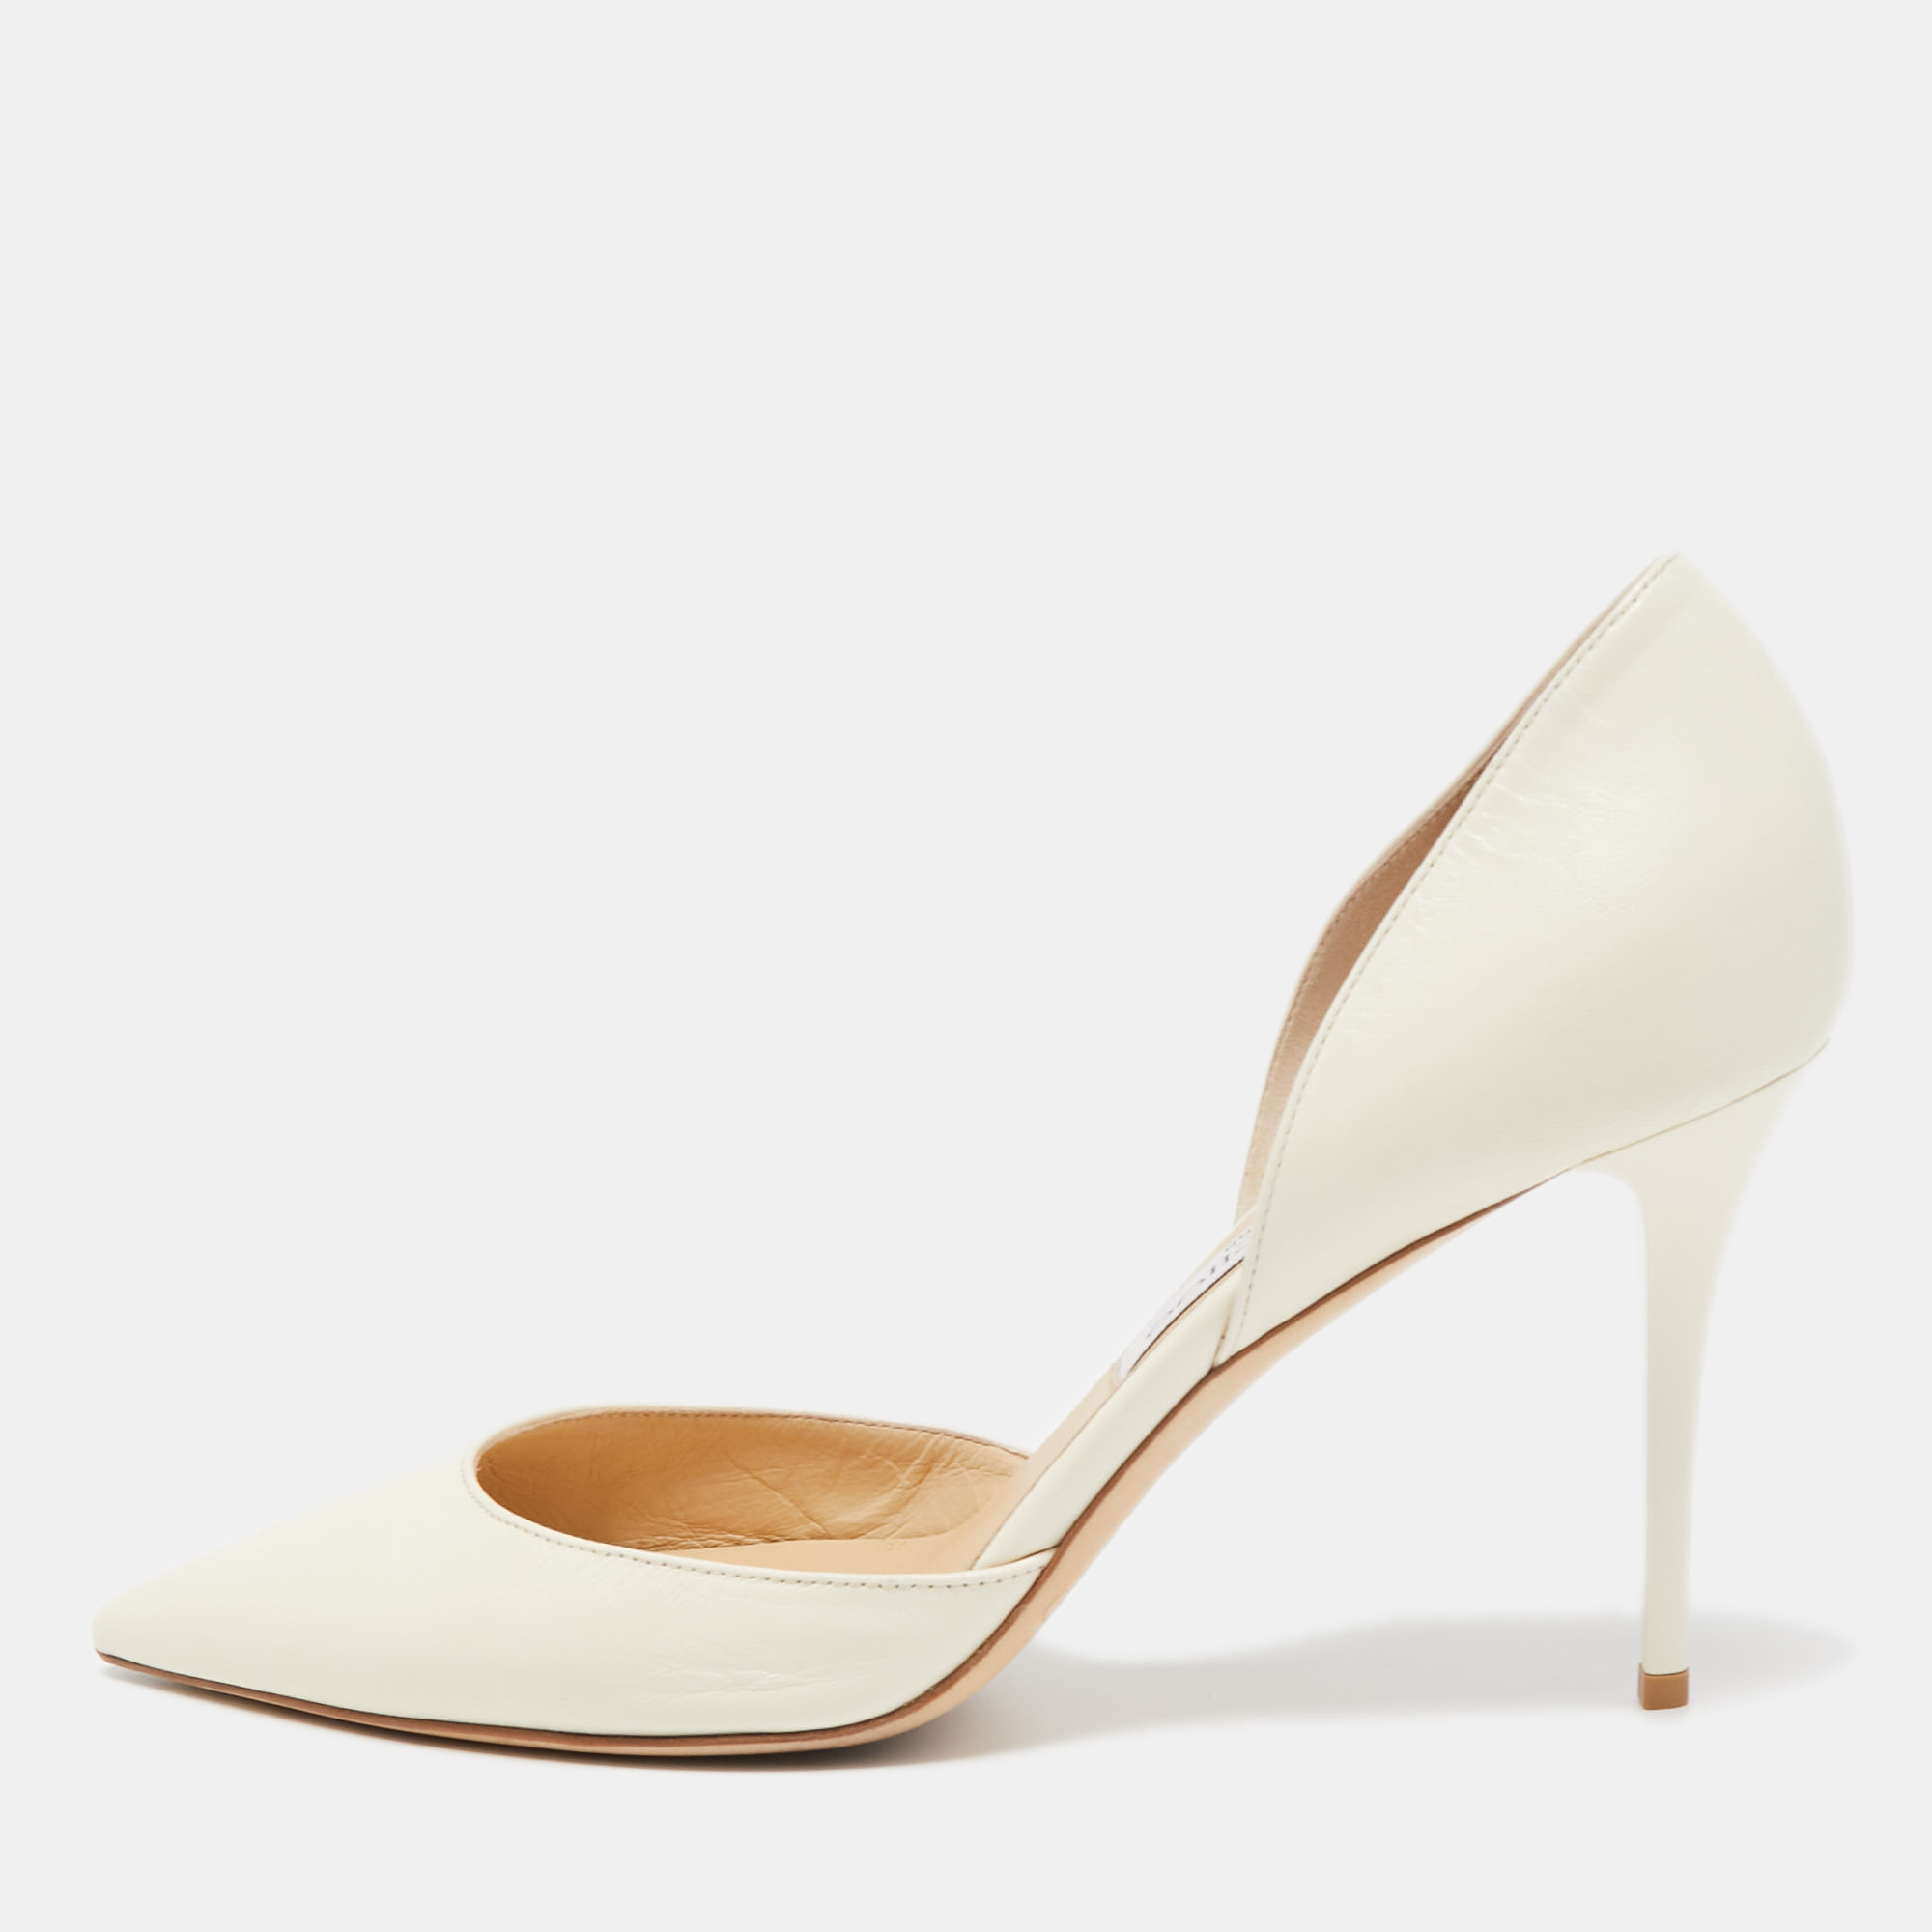 Jimmy choo white leather addison d'orsay pointed toe pumps size 40